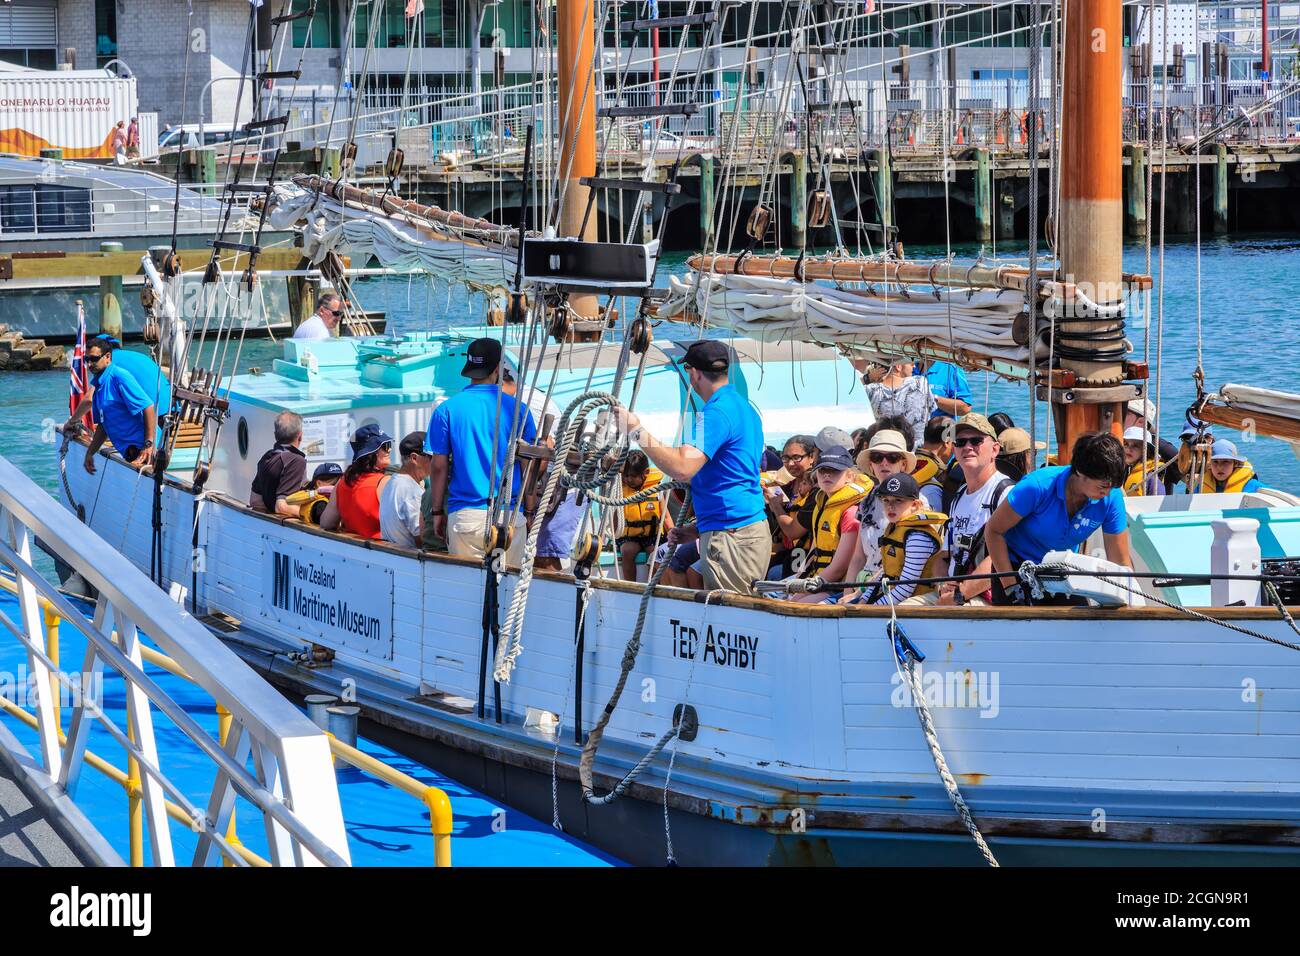 Passengers on a traditional sailing ship, the  New Zealand Maritime Museum's 'Ted Ashby', about to depart on a harbor cruise. Auckland, NZ, 1/27/2019 Stock Photo